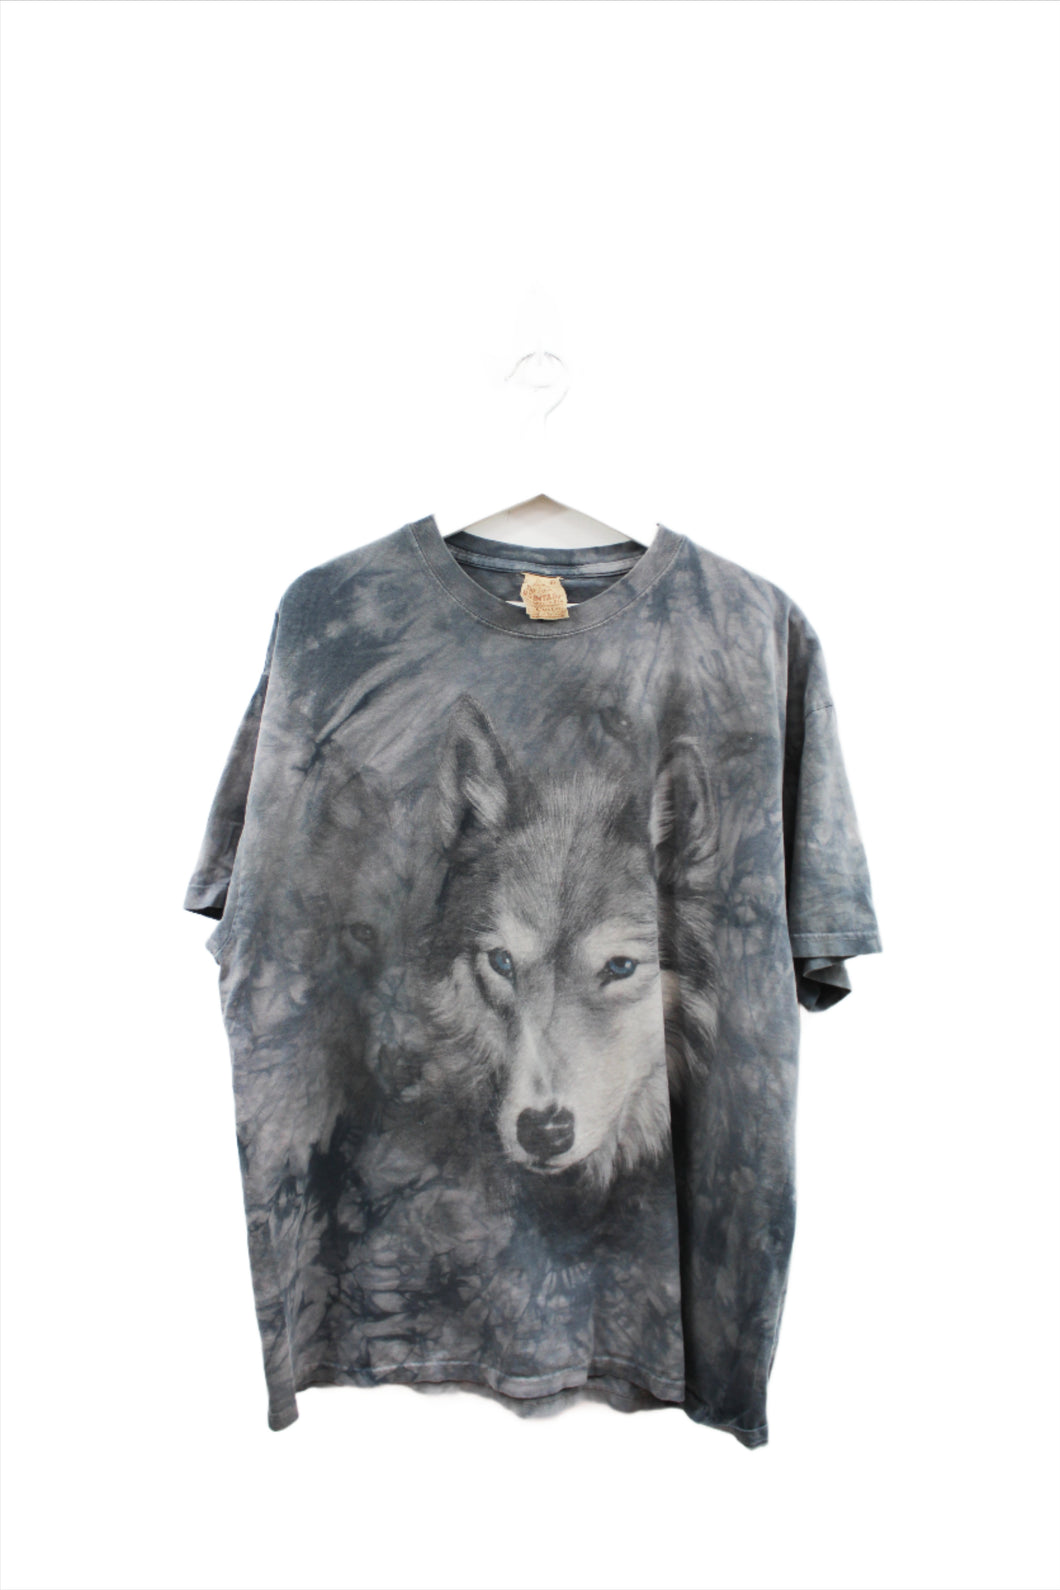 X - Vintage 2002 The Mountain All Over Print Wolf Tee